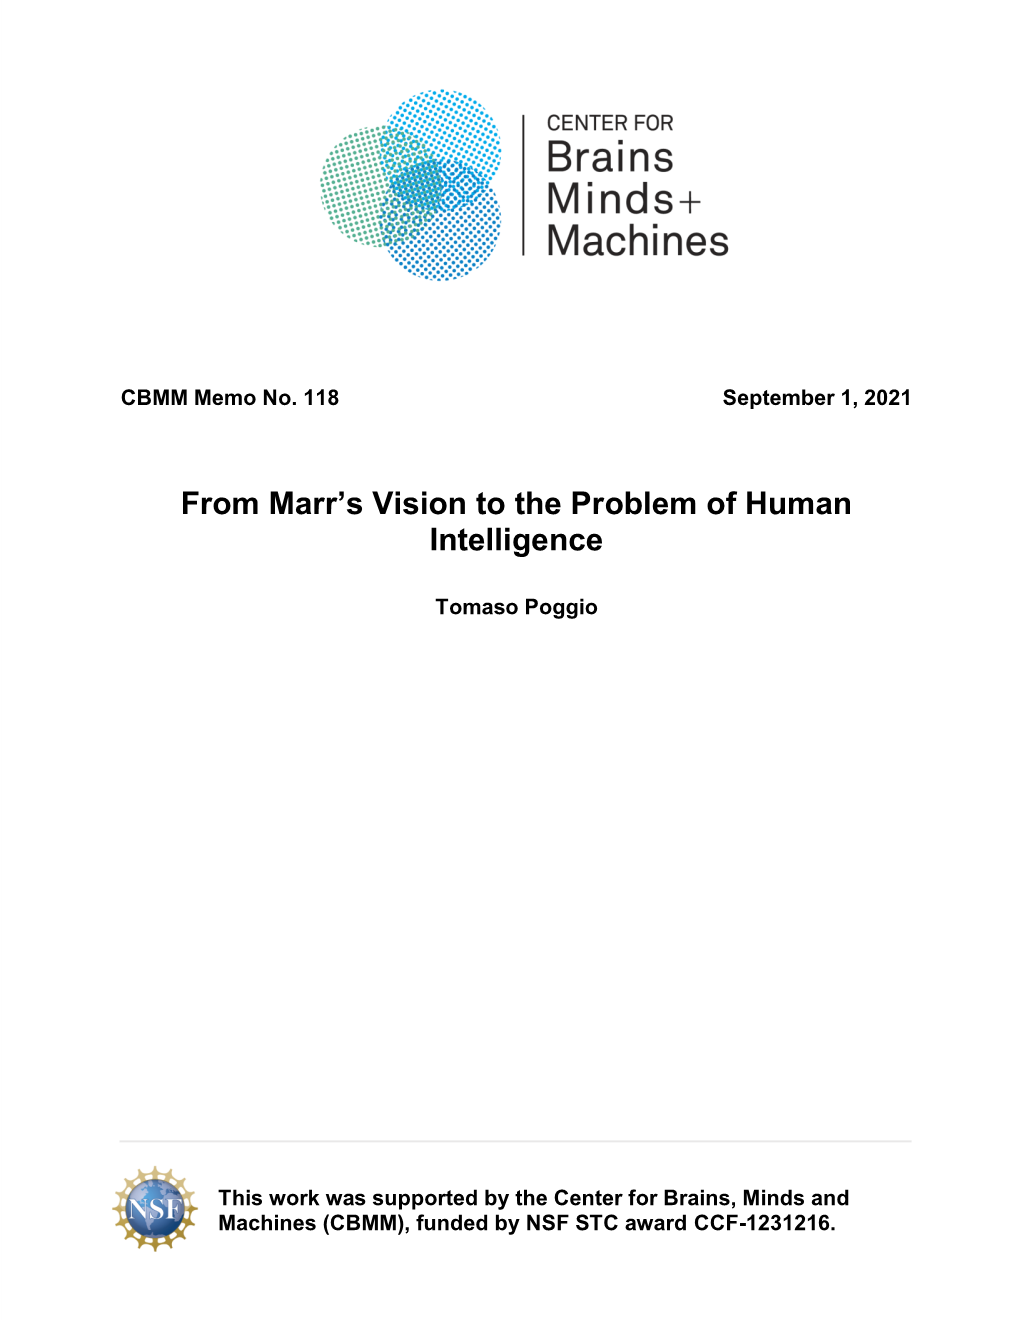 From Marr's Vision to the Problem of Human Intelligence